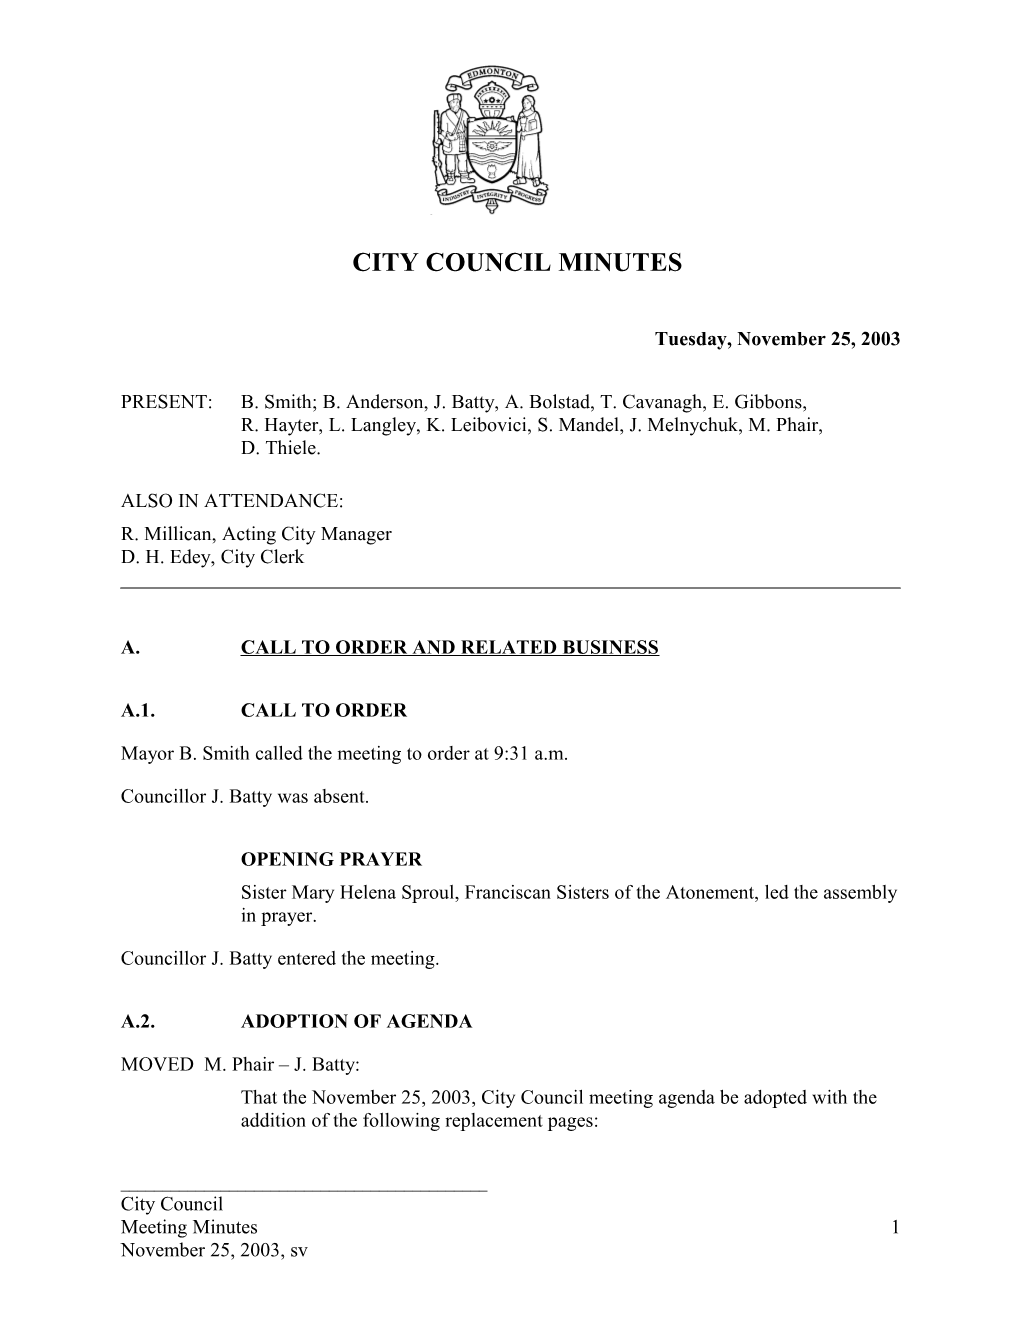 Minutes for City Council November 25, 2003 Meeting